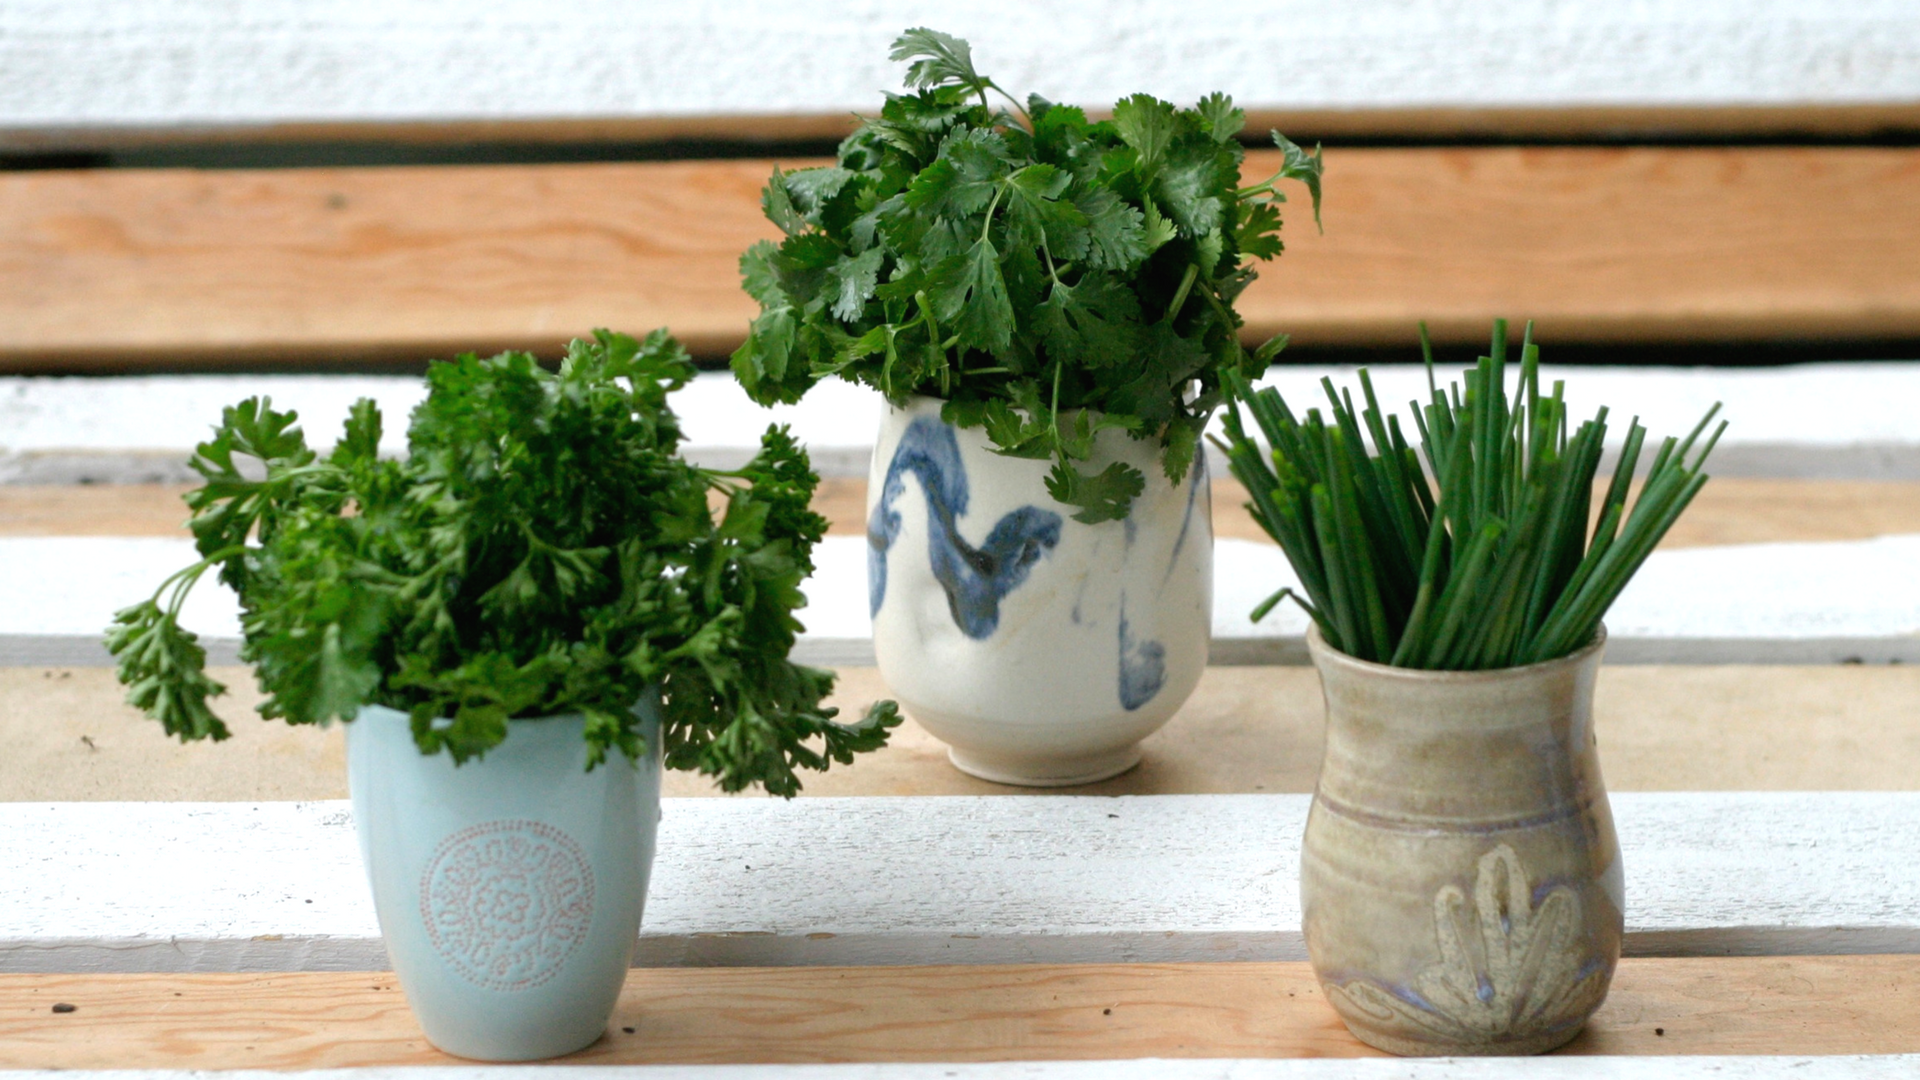 Photo Credit: the Green Moustache - Vit C in parsley: 133mg/100g